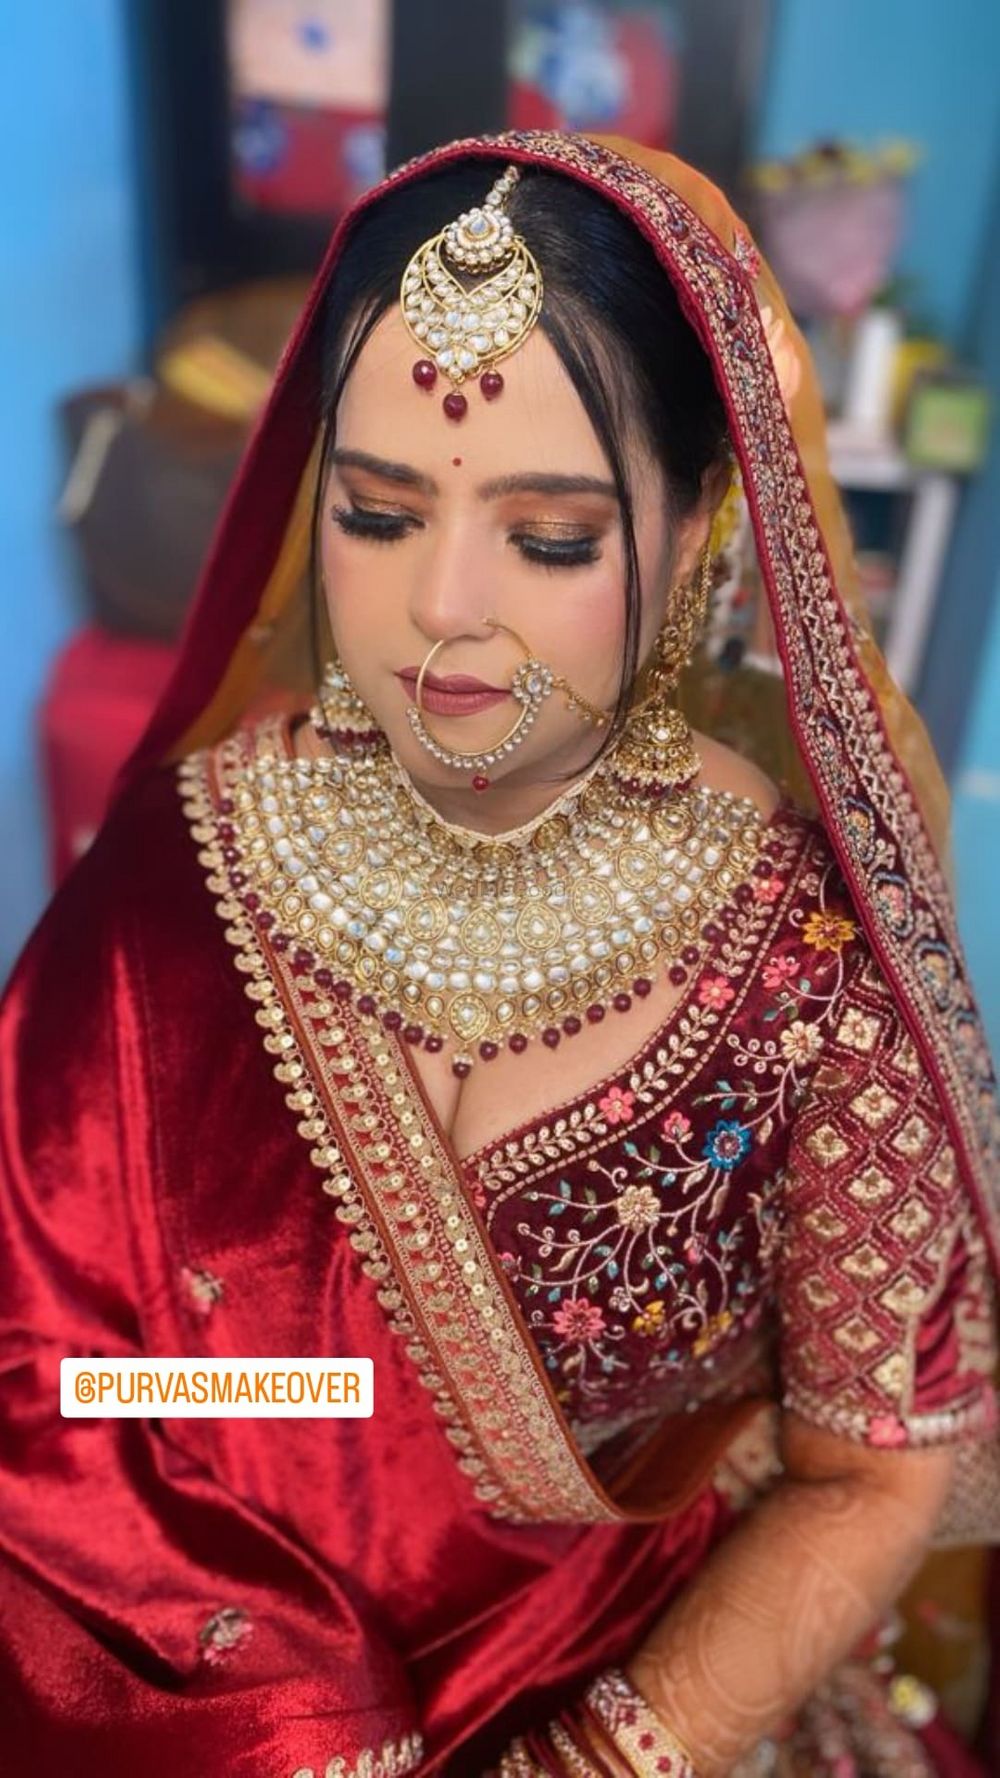 Photo By Purva's Makeover - Bridal Makeup